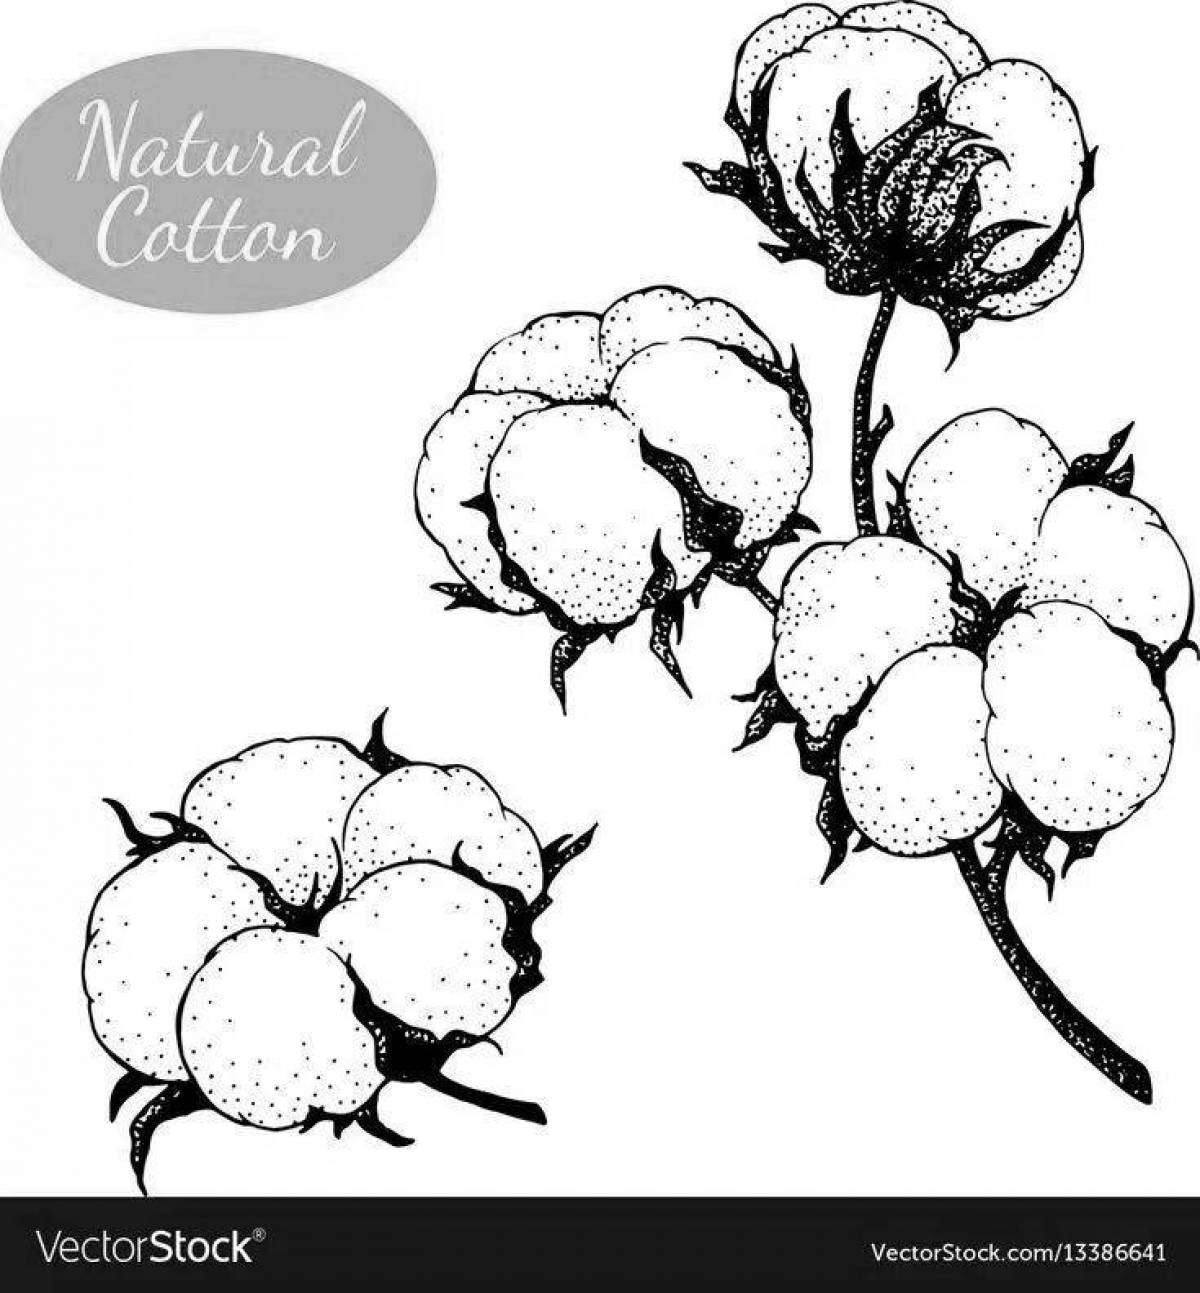 Playful cotton coloring page